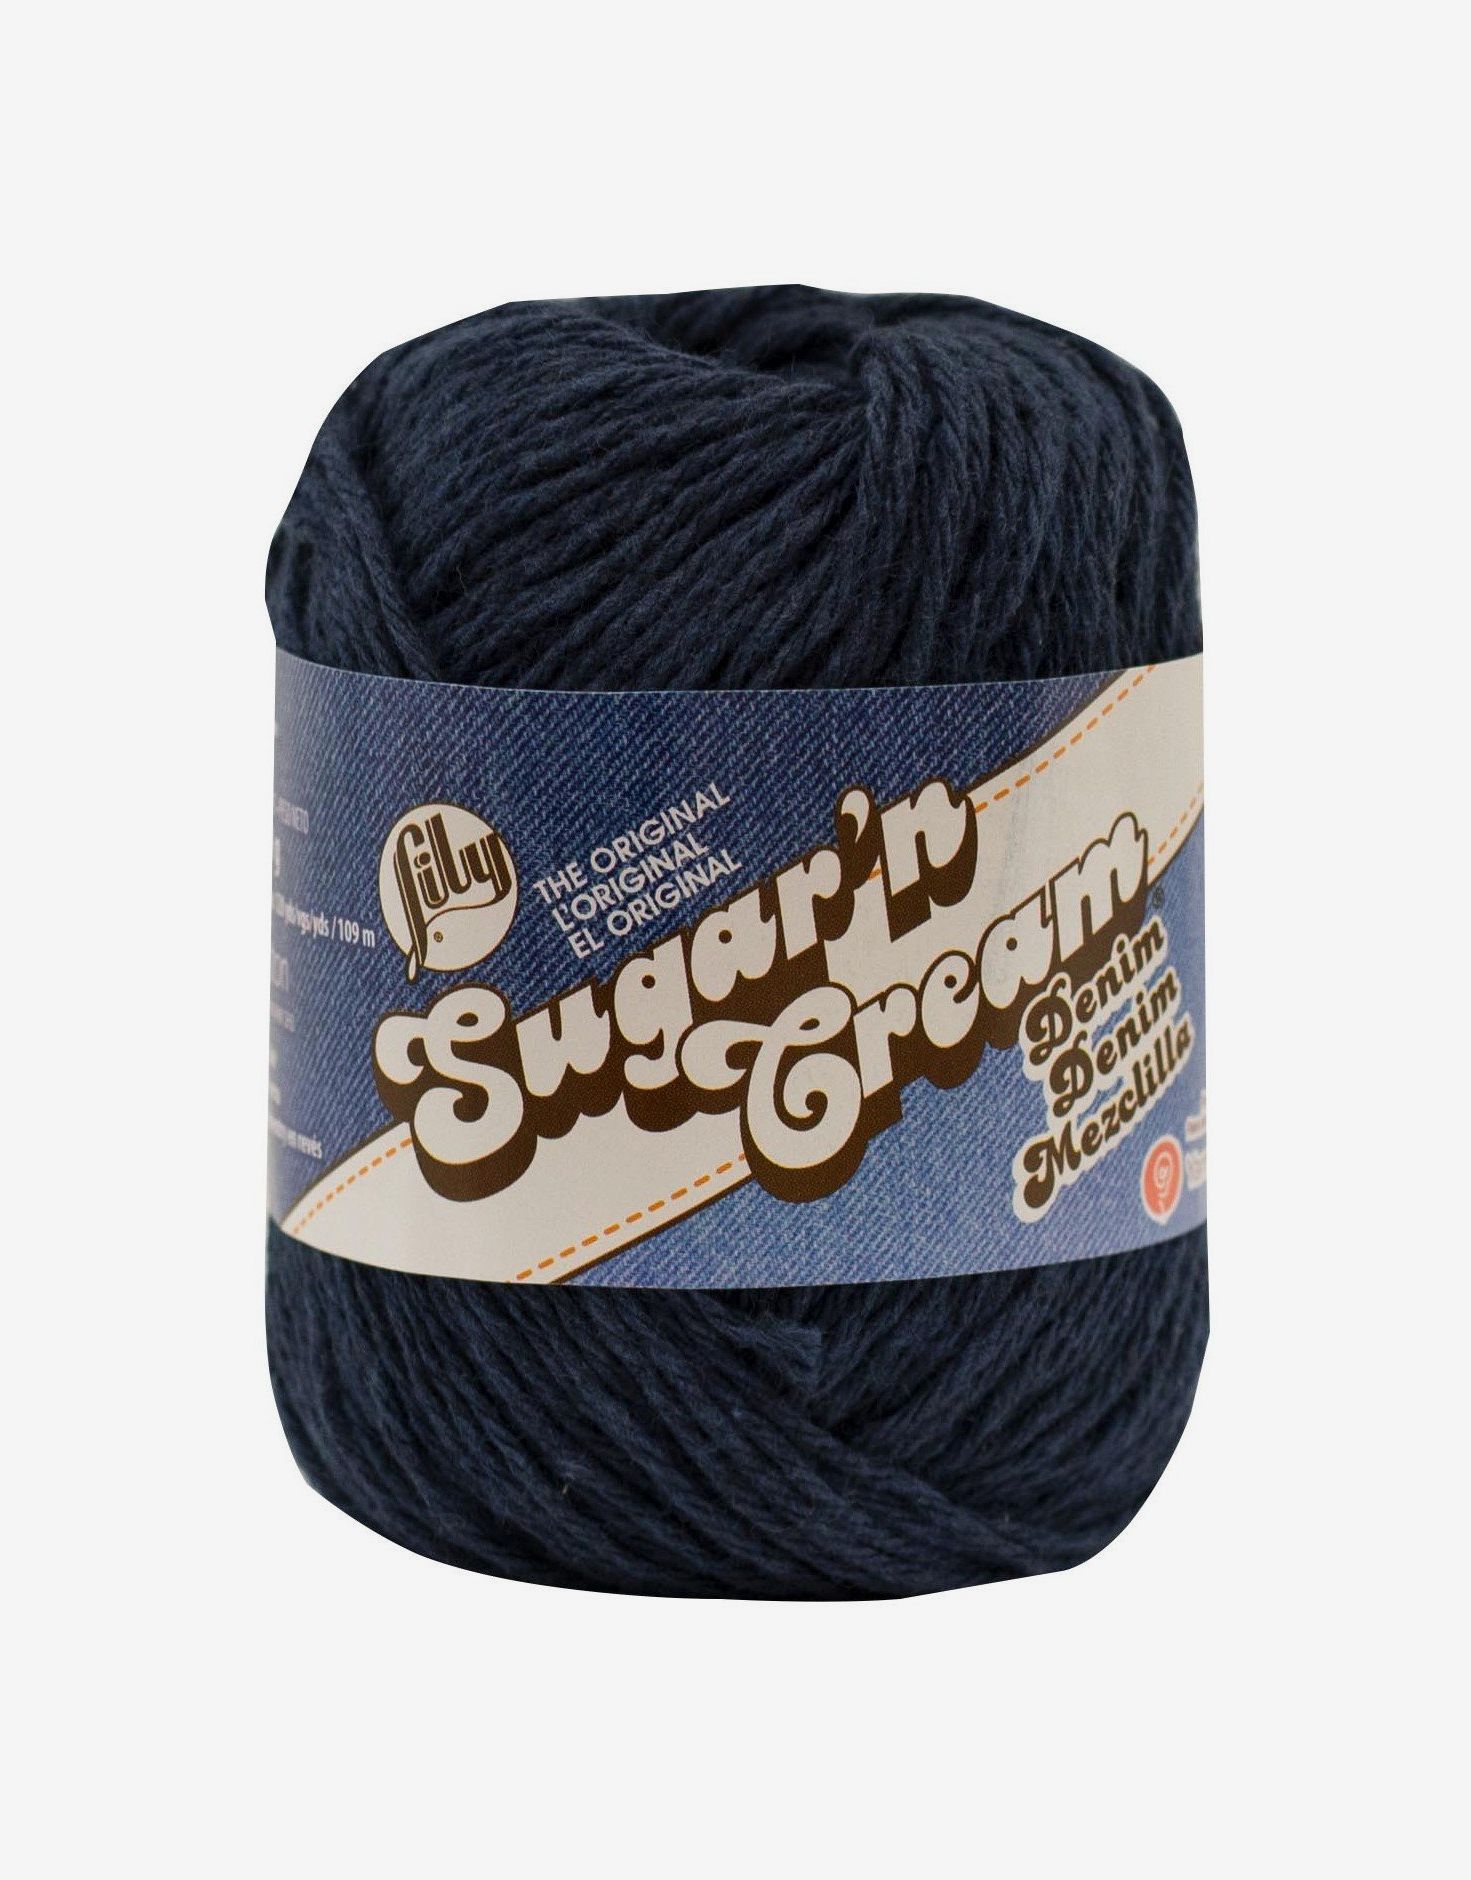 Best Chunky Yarn for Knitting, Weaving, Crocheting, and More